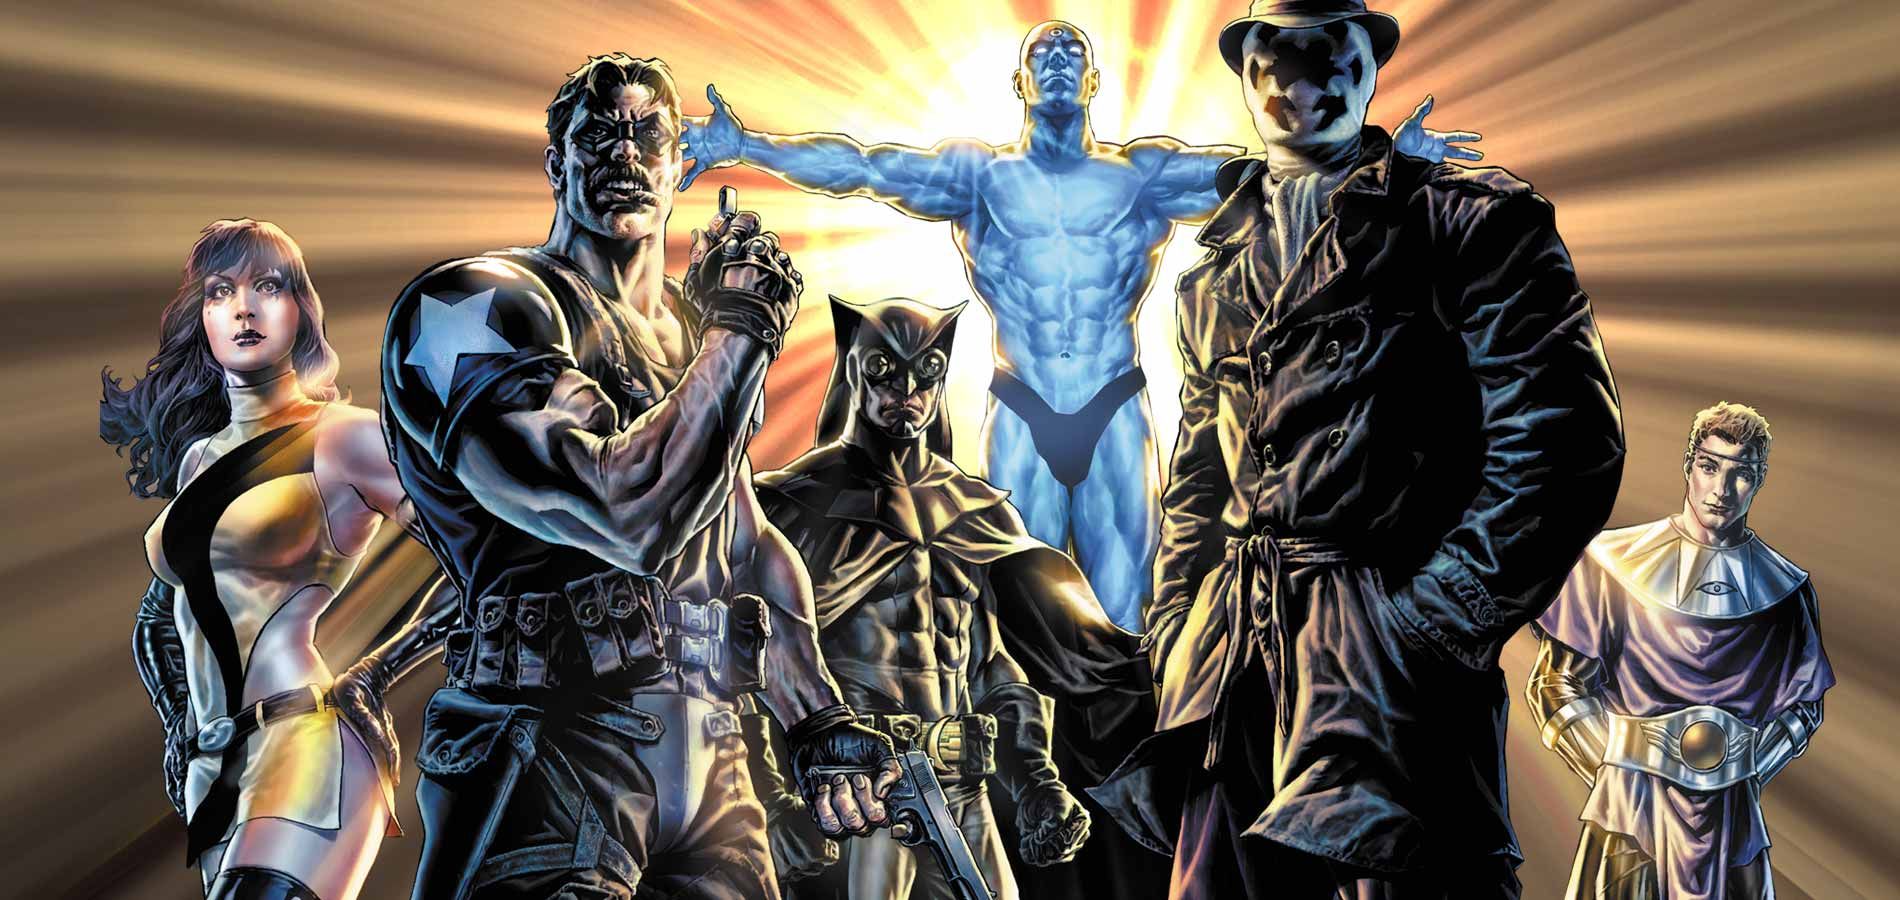 Watchmen Owner Xxx Video - Will Original Watchmen Characters Be in the HBO Series? Will Doctor  Manhattan, Nite Owl, Silk Spectre Appear